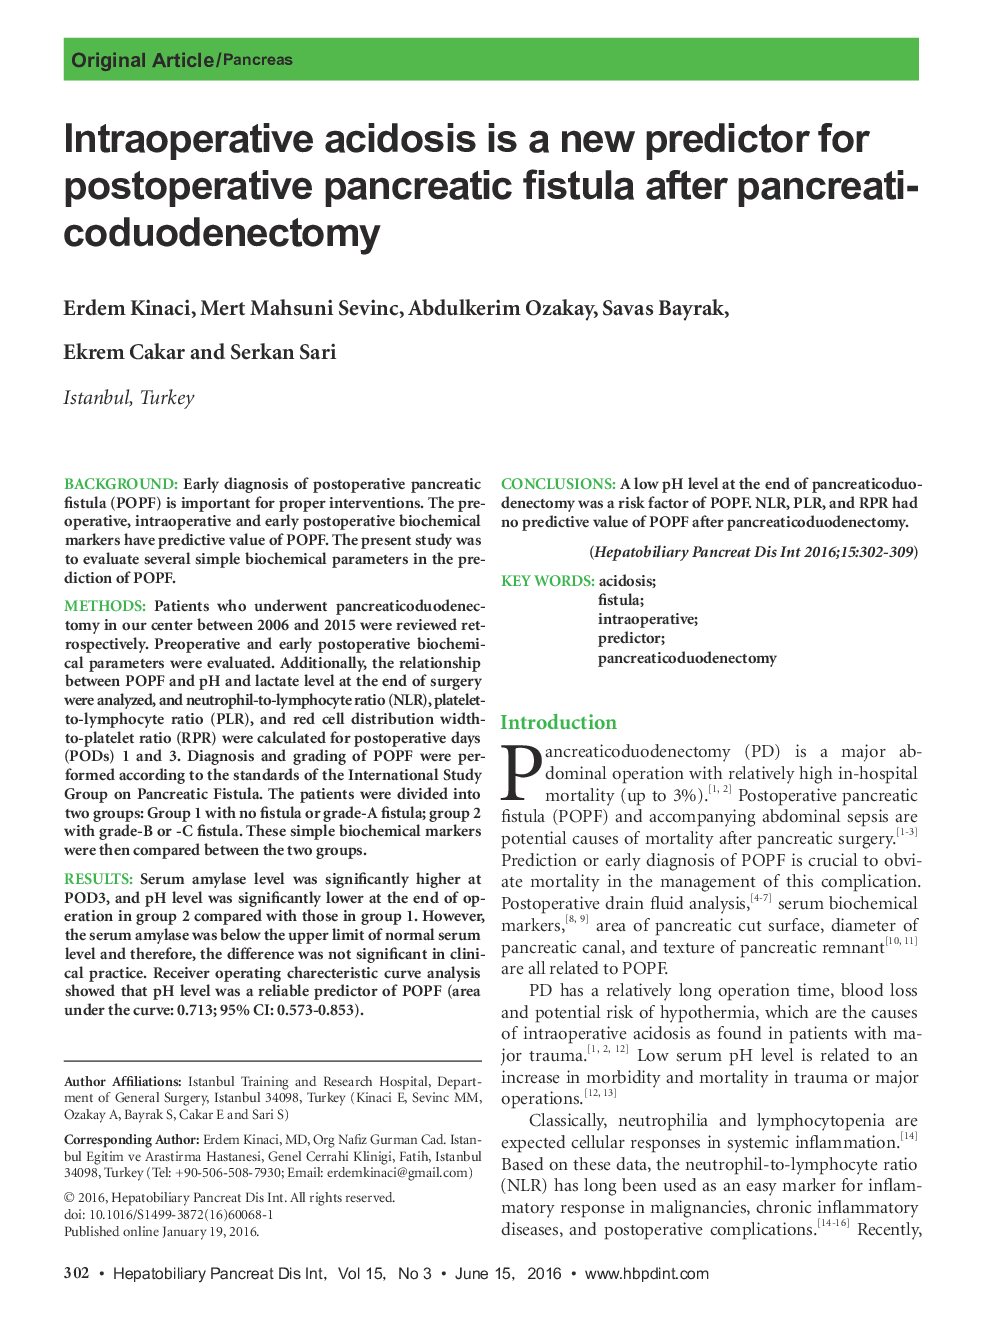 Intraoperative acidosis is a new predictor for postoperative pancreatic fistula after pancreaticoduodenectomy